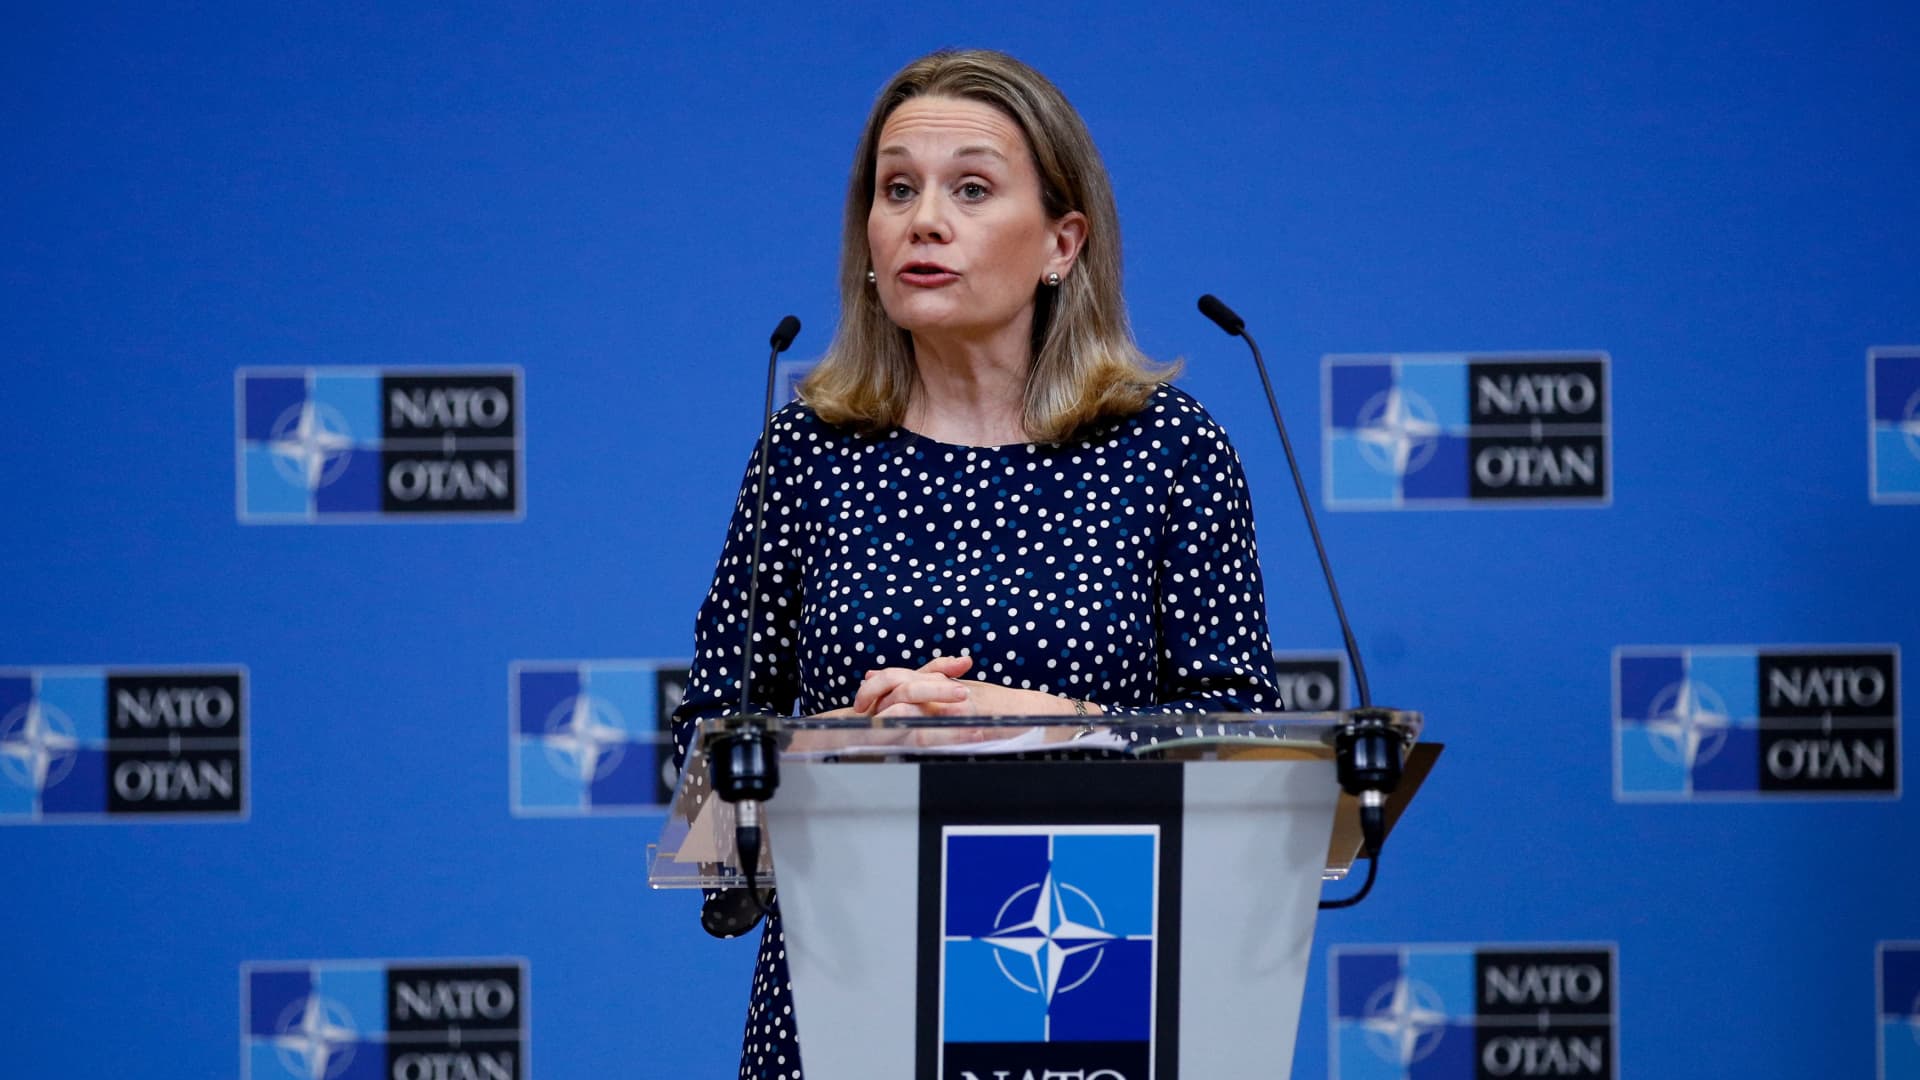 U.S. Ambassador to NATO Julianne Smith speaks during a news briefing on the eve of a meeting of alliance defence ministers, expected to focus on tensions between Russia and the West over Ukraine, in Brussels, Belgium, February 15, 2022.